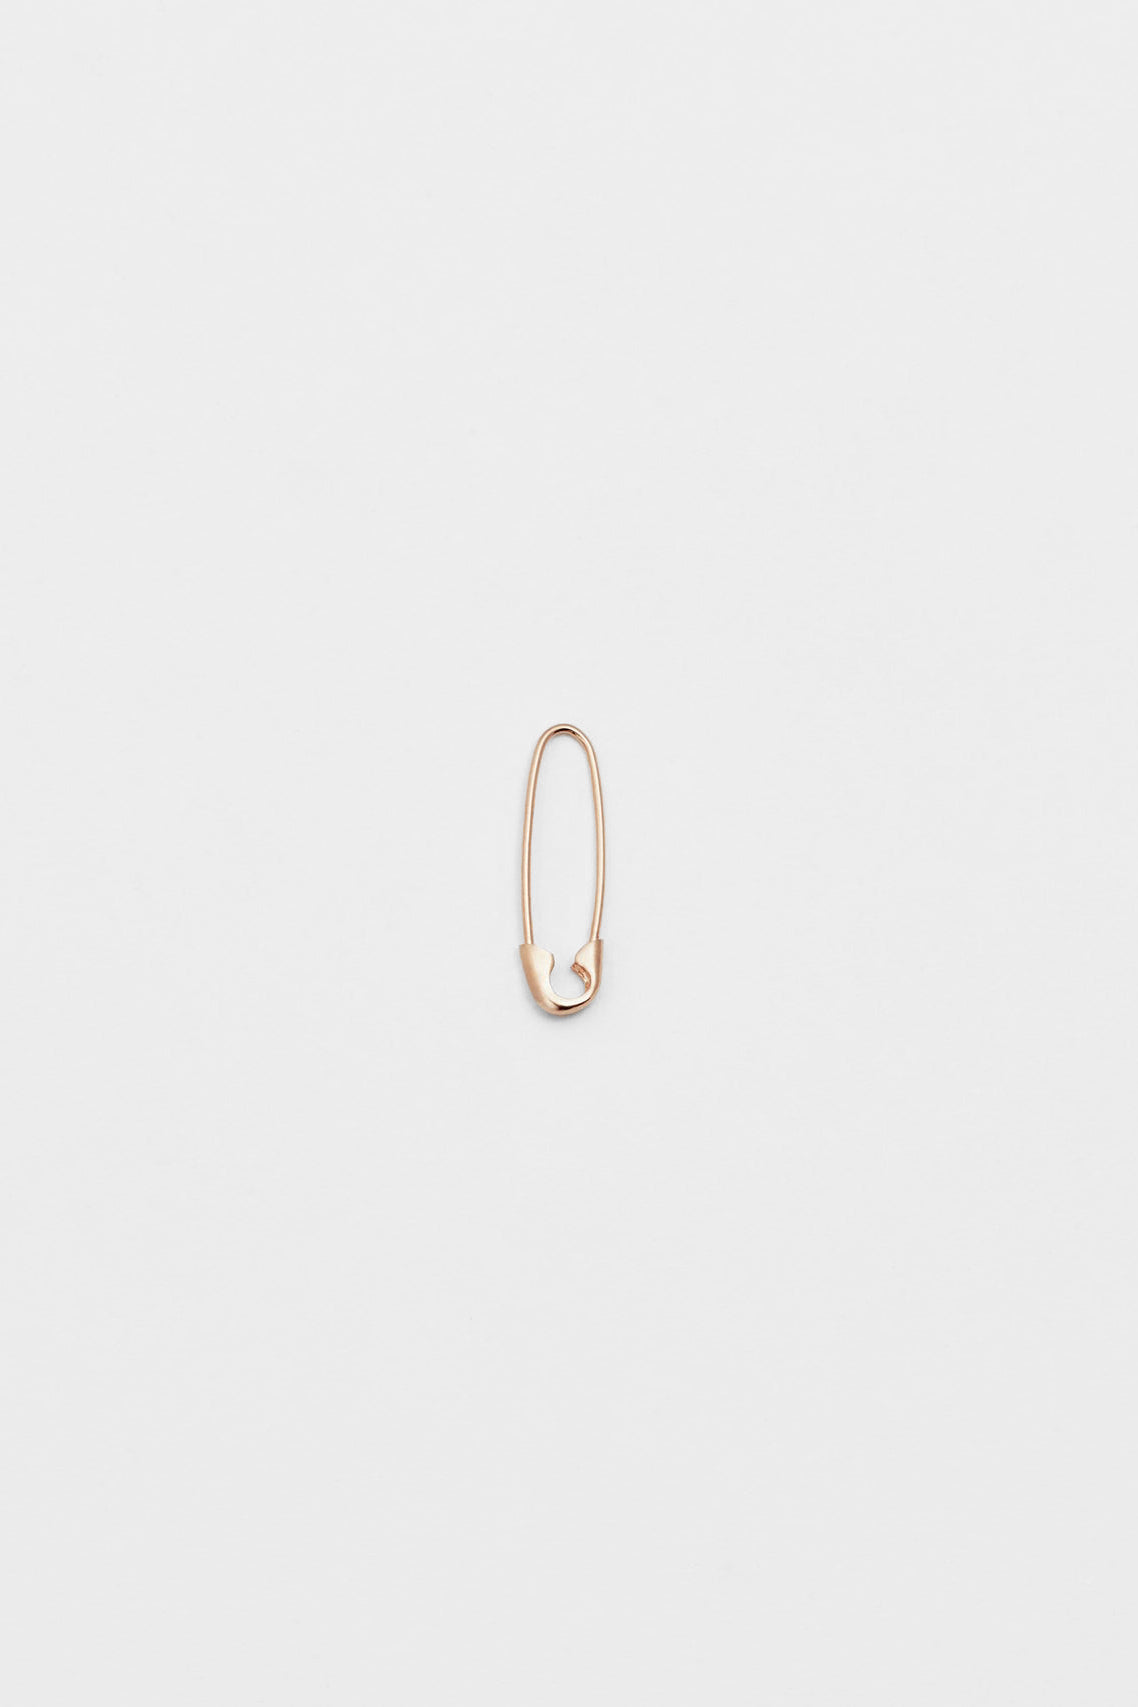 Mini Safety Pin Earring in 14k Rose Gold